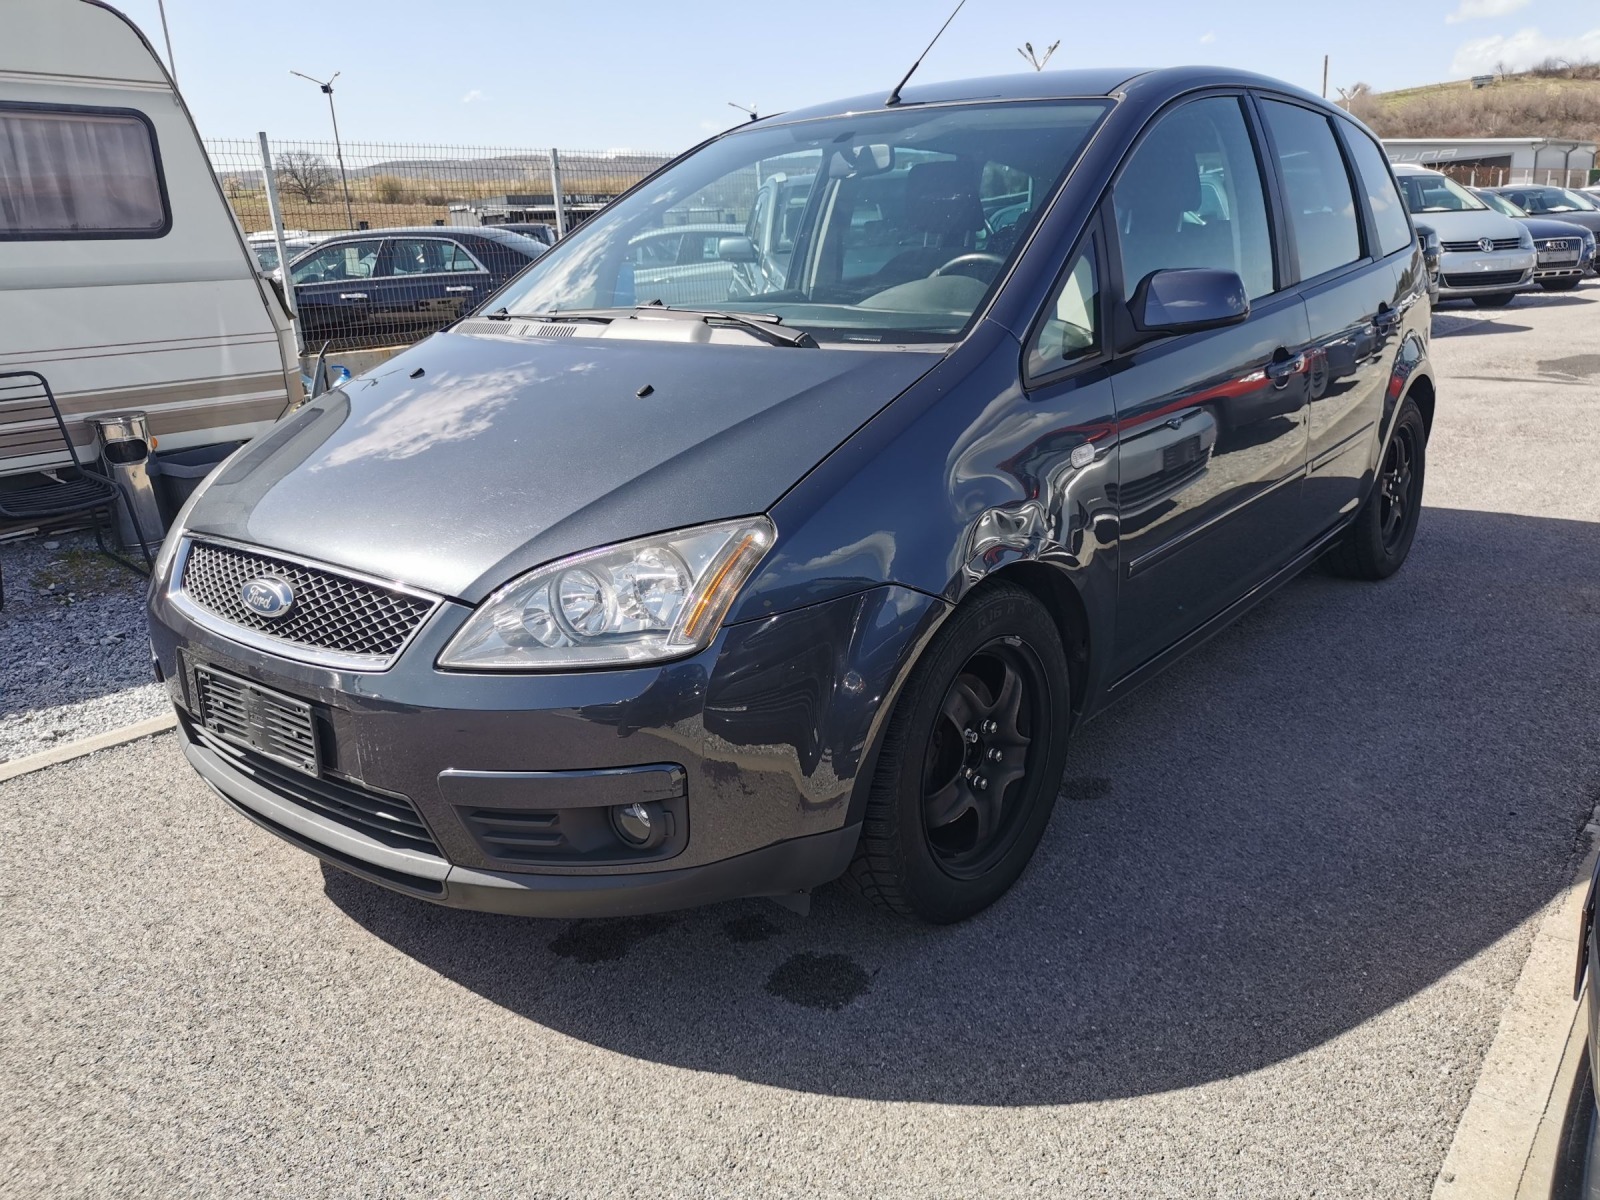 Ford Focus HDI - [1] 